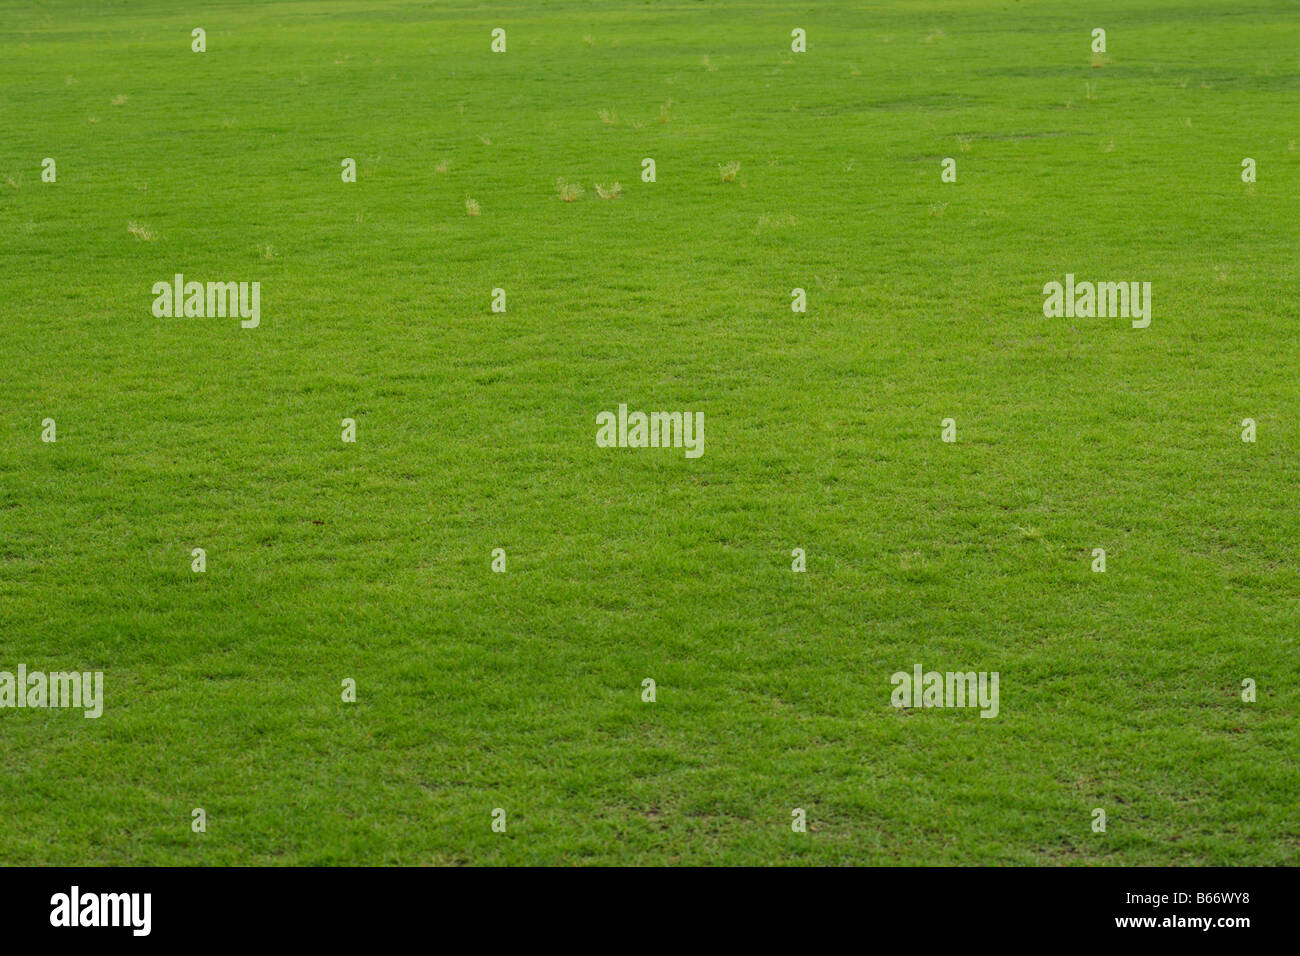 Full Frame View of Lawn Stock Photo